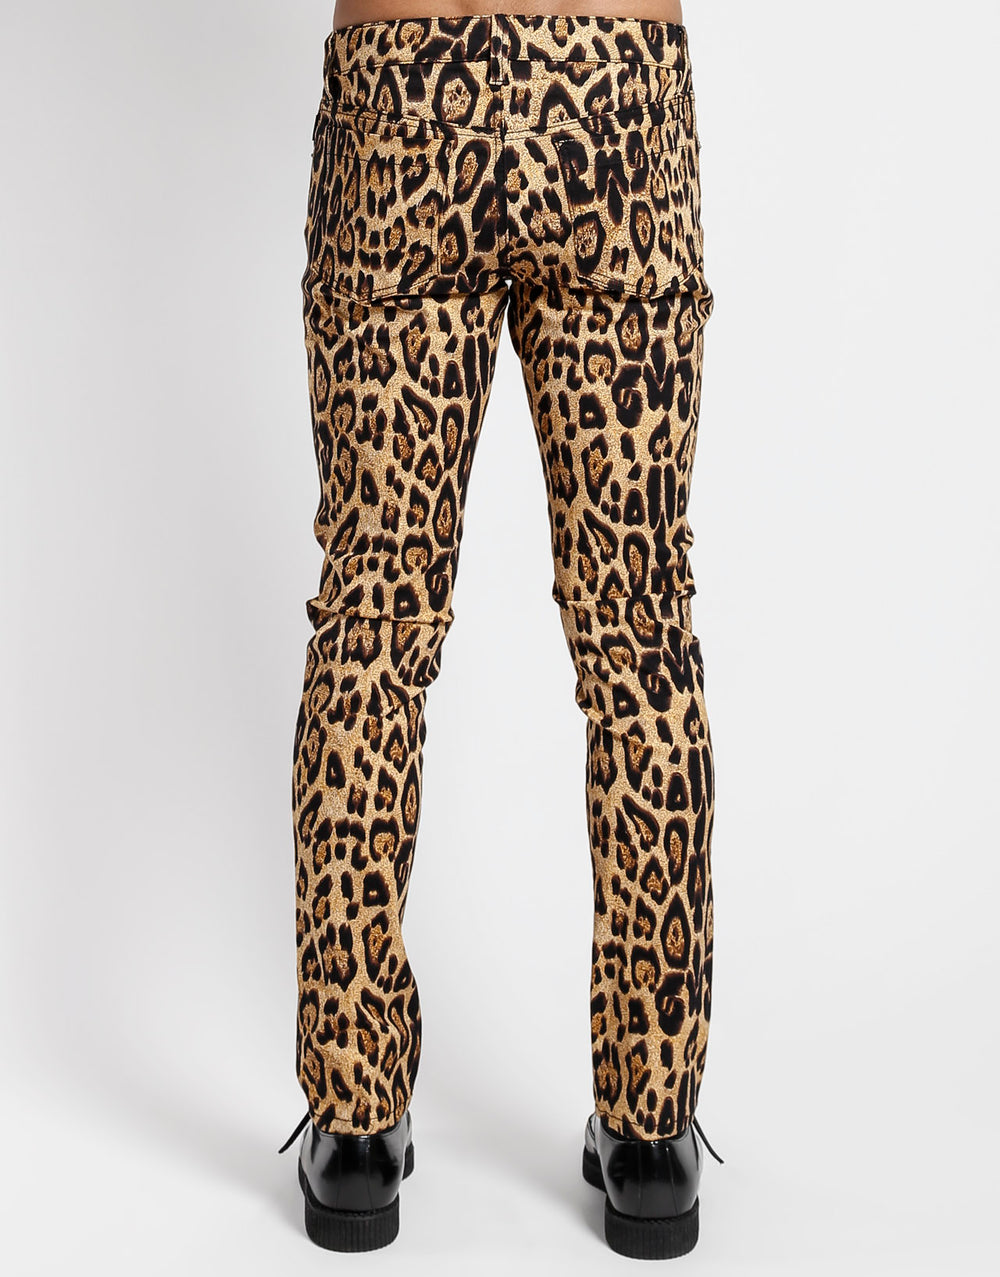 CCS Original Relaxed Chino Pants  Leopard